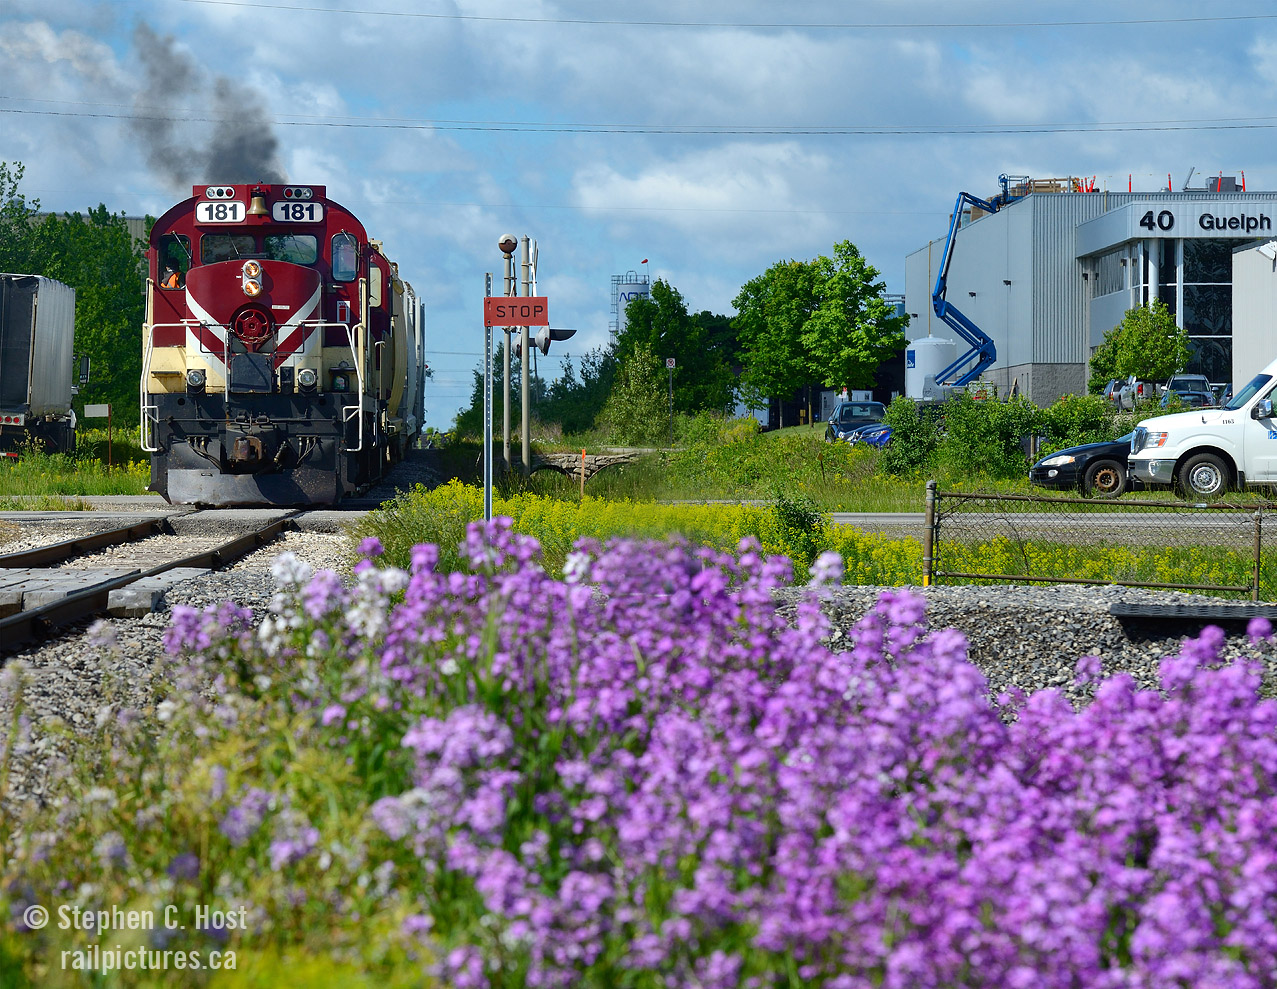 More spring.... and more smoke - can't go wrong with the MLW's on the Ontario Southland Railway. Crossing the 'Hanlon Expressway'. I 'placed' the shot with the Guelph Tool sign at top right. This spur was built in 1955 by the Guelph Junction Railway - the MTO regretted approving the railway across what as then a planned divided highway for a long long time and will finally rectify the problem by placing an overpass at one of these two crossings in the next year. The other crossing will be closed, and a new connection in the far background will be built between both GJR industrial spurs allowing GEXR/OSR continued access to customers. In 1955 GJR (through the City of Guelph) was proactive in seeing the benefit of rail access in an industrial park, and built two spurs despite not having a direct connection to them - which was not rectified until the purchase of the remains of the Guelph and Goderich Railway (from the River Run Centre to end of track) for a few million in 1997. Funny enough, the 'Guelph and Goderich' was re-organized to be under the Toronto Hamilton and Buffalo railway in STLH at the time! It would be nice to see Canadian cities be proactive in building rail access in new industrial parks.. but when was the last time that happened.